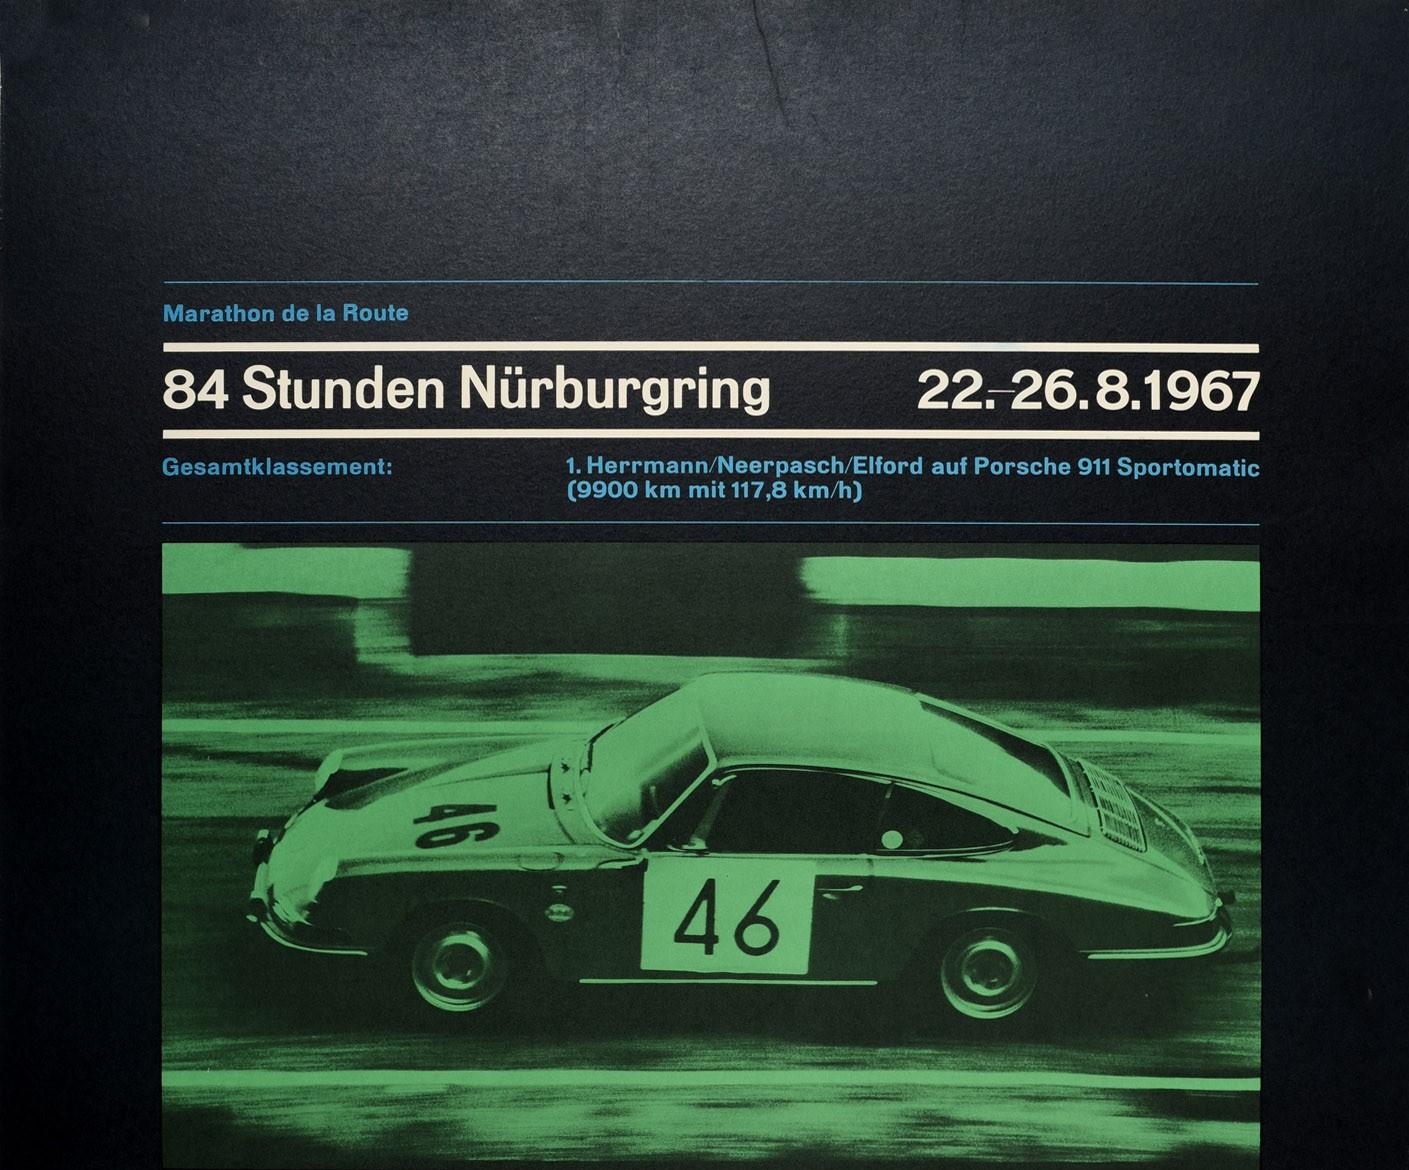 Original vintage auto racing poster celebrating the Porsche Sportomatic win in the world's longest endurance motor race - the Marathon de la Route 84 Hours Nurburgring - from 22-26 August 1967 featuring a dynamic green tinted photograph of a number